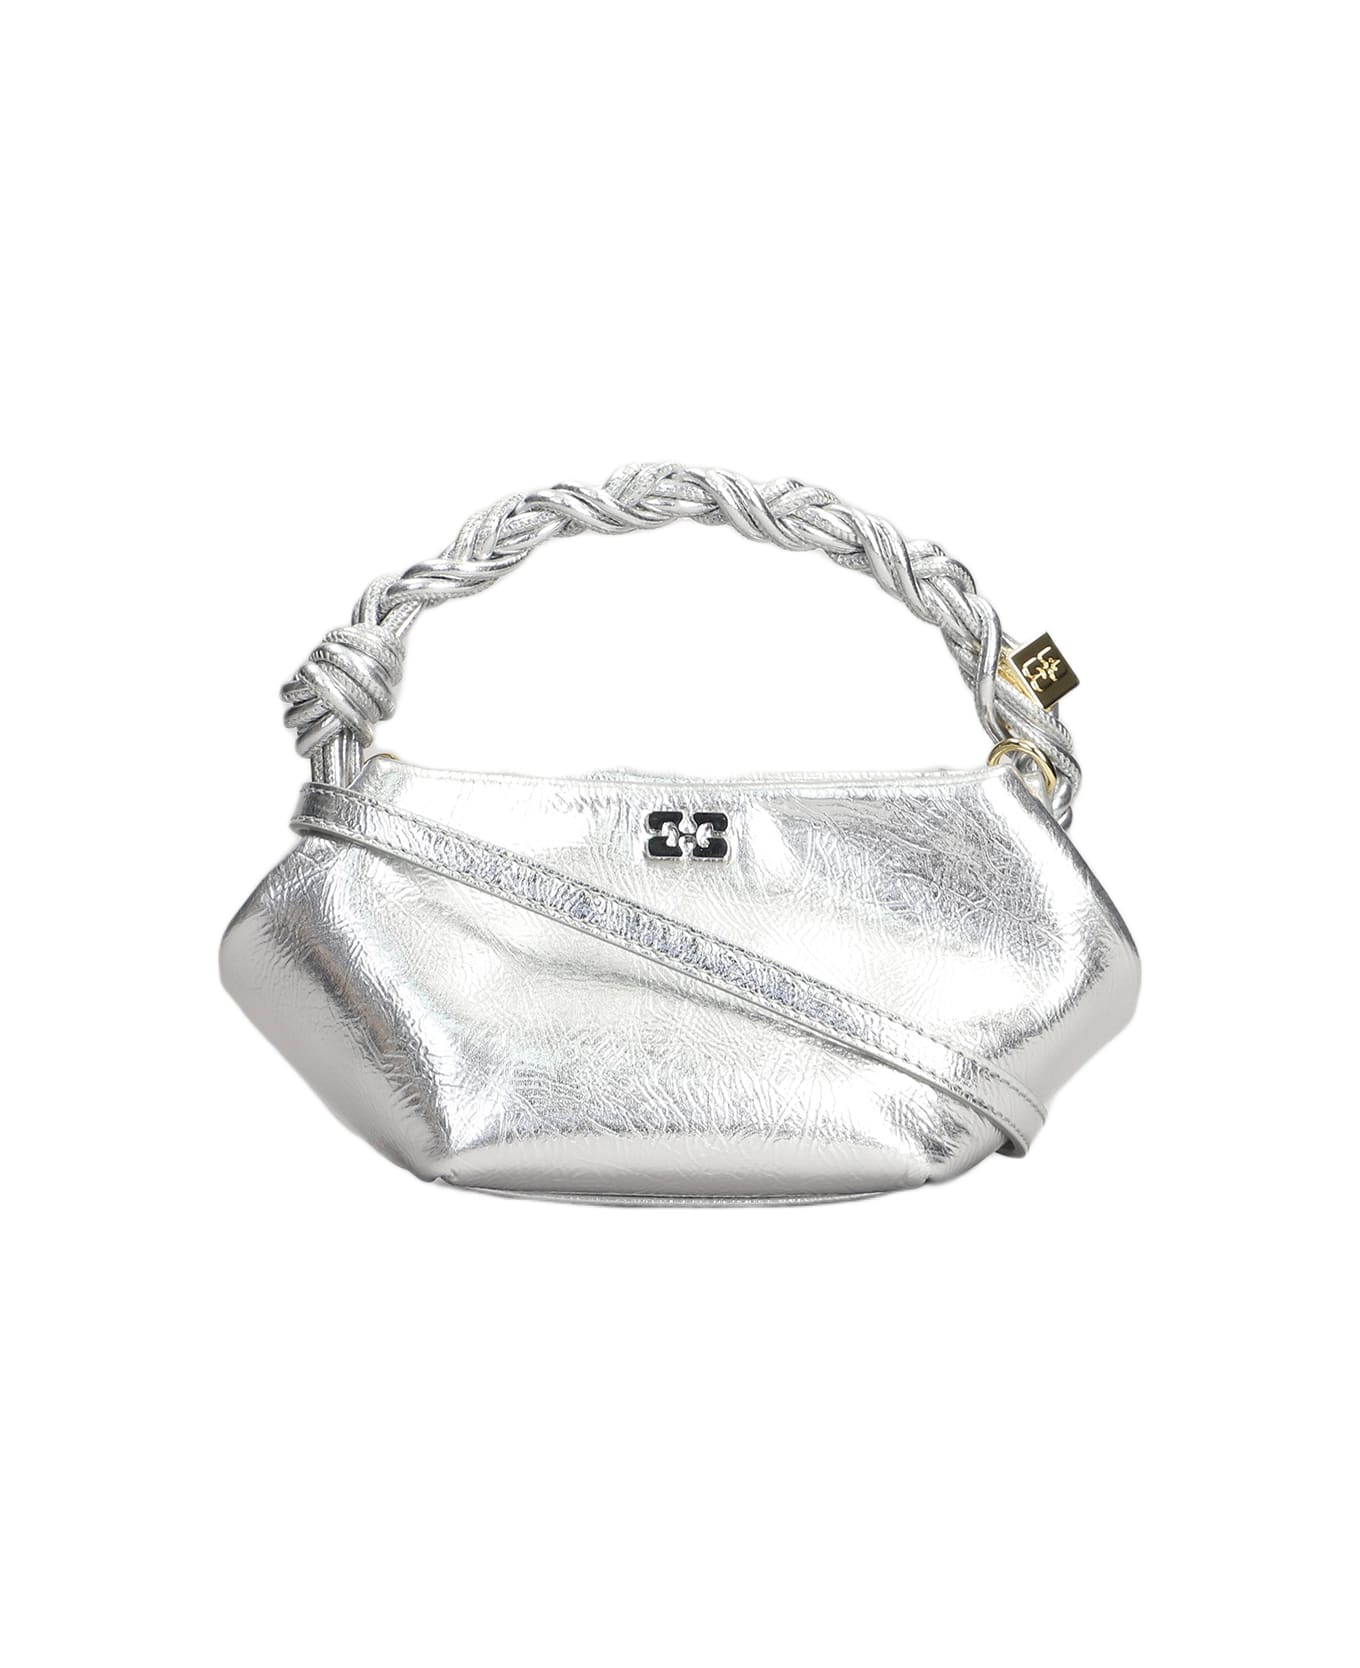 Ganni Hand Bag In Silver Leather - Argento